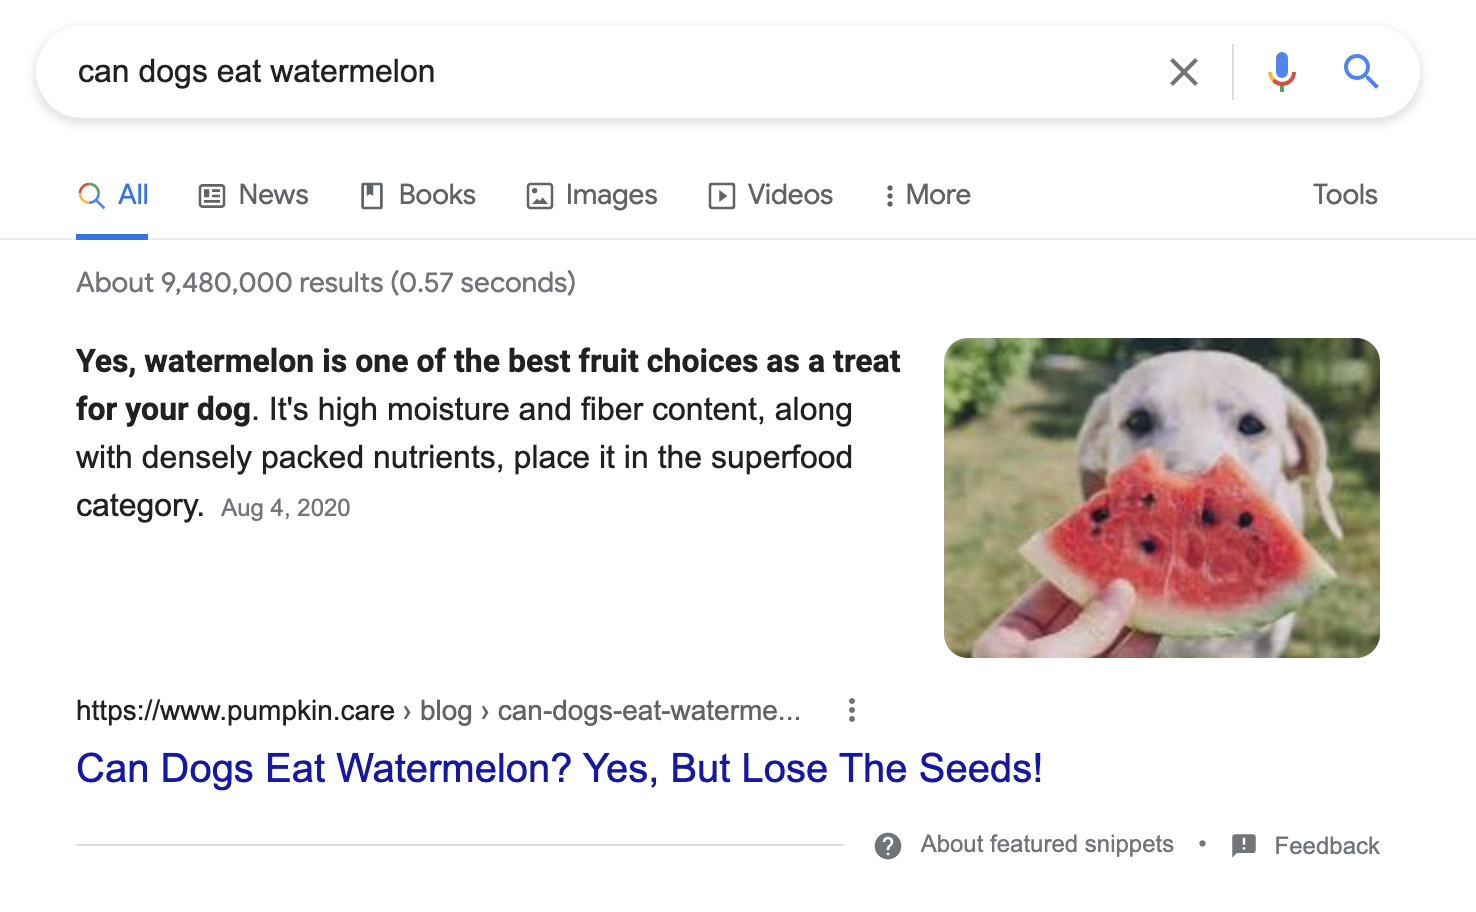 Can dogs eat watermelon featured snippet